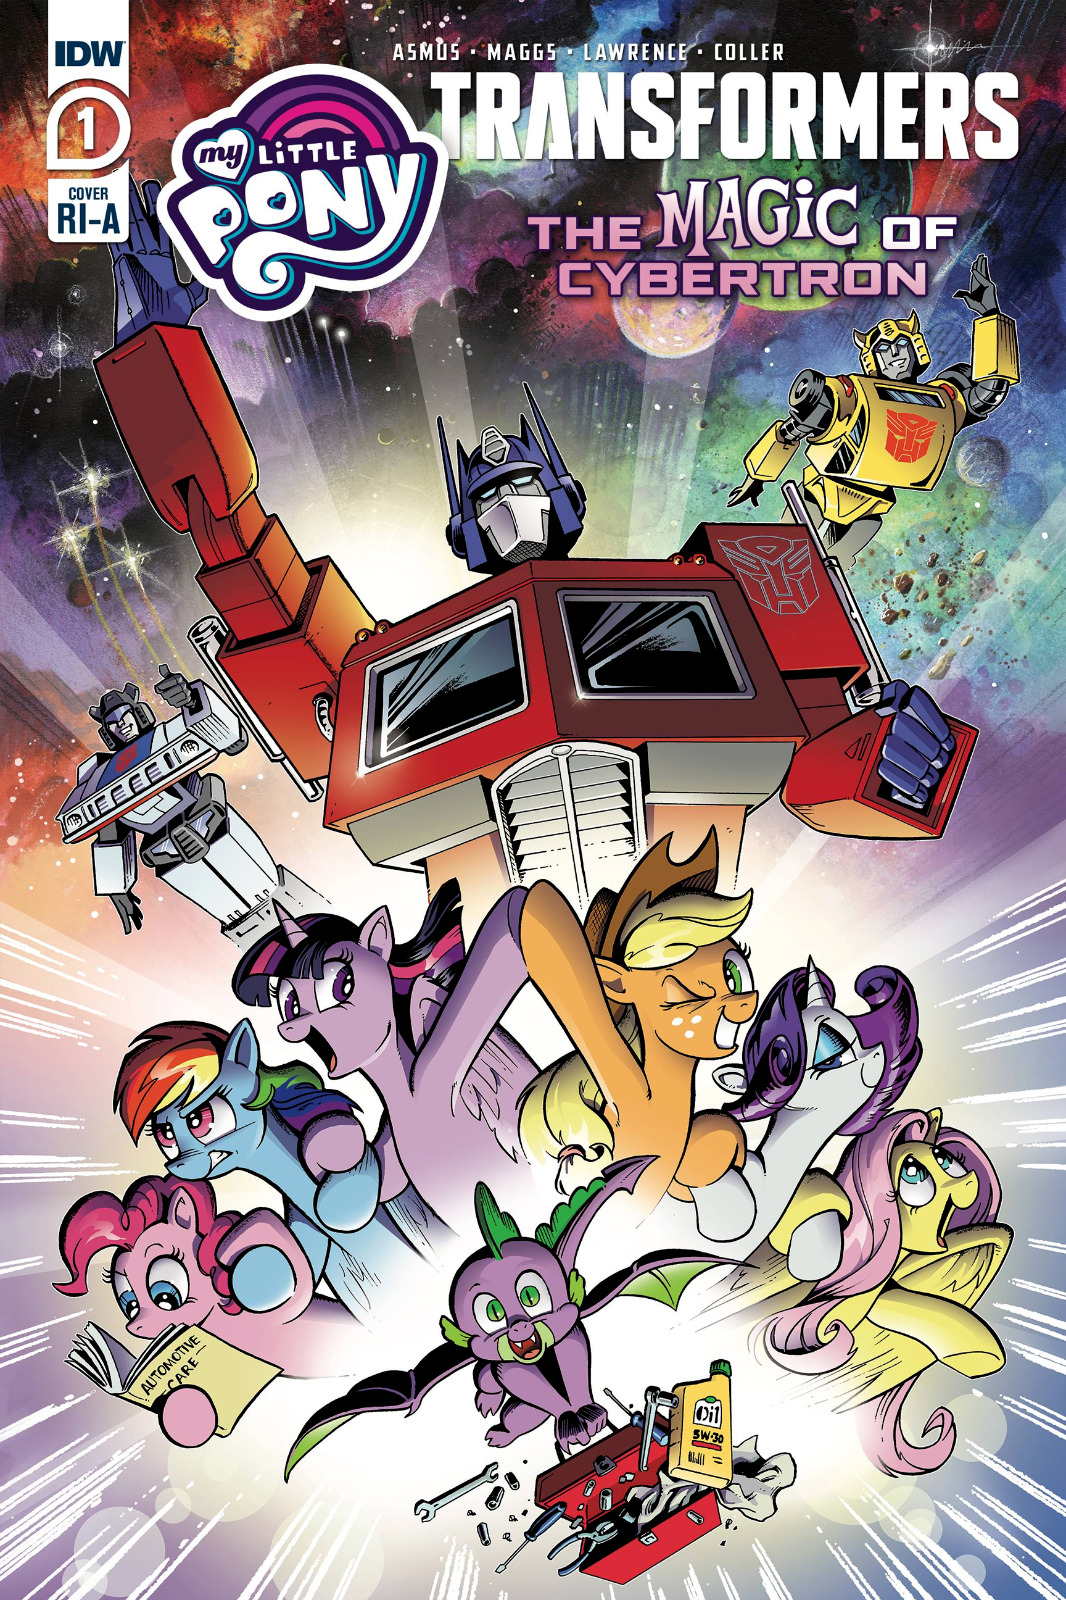 Transformers My Little Pony Magic of Cybertron #1 1:10 IDW Comics - NM or Better